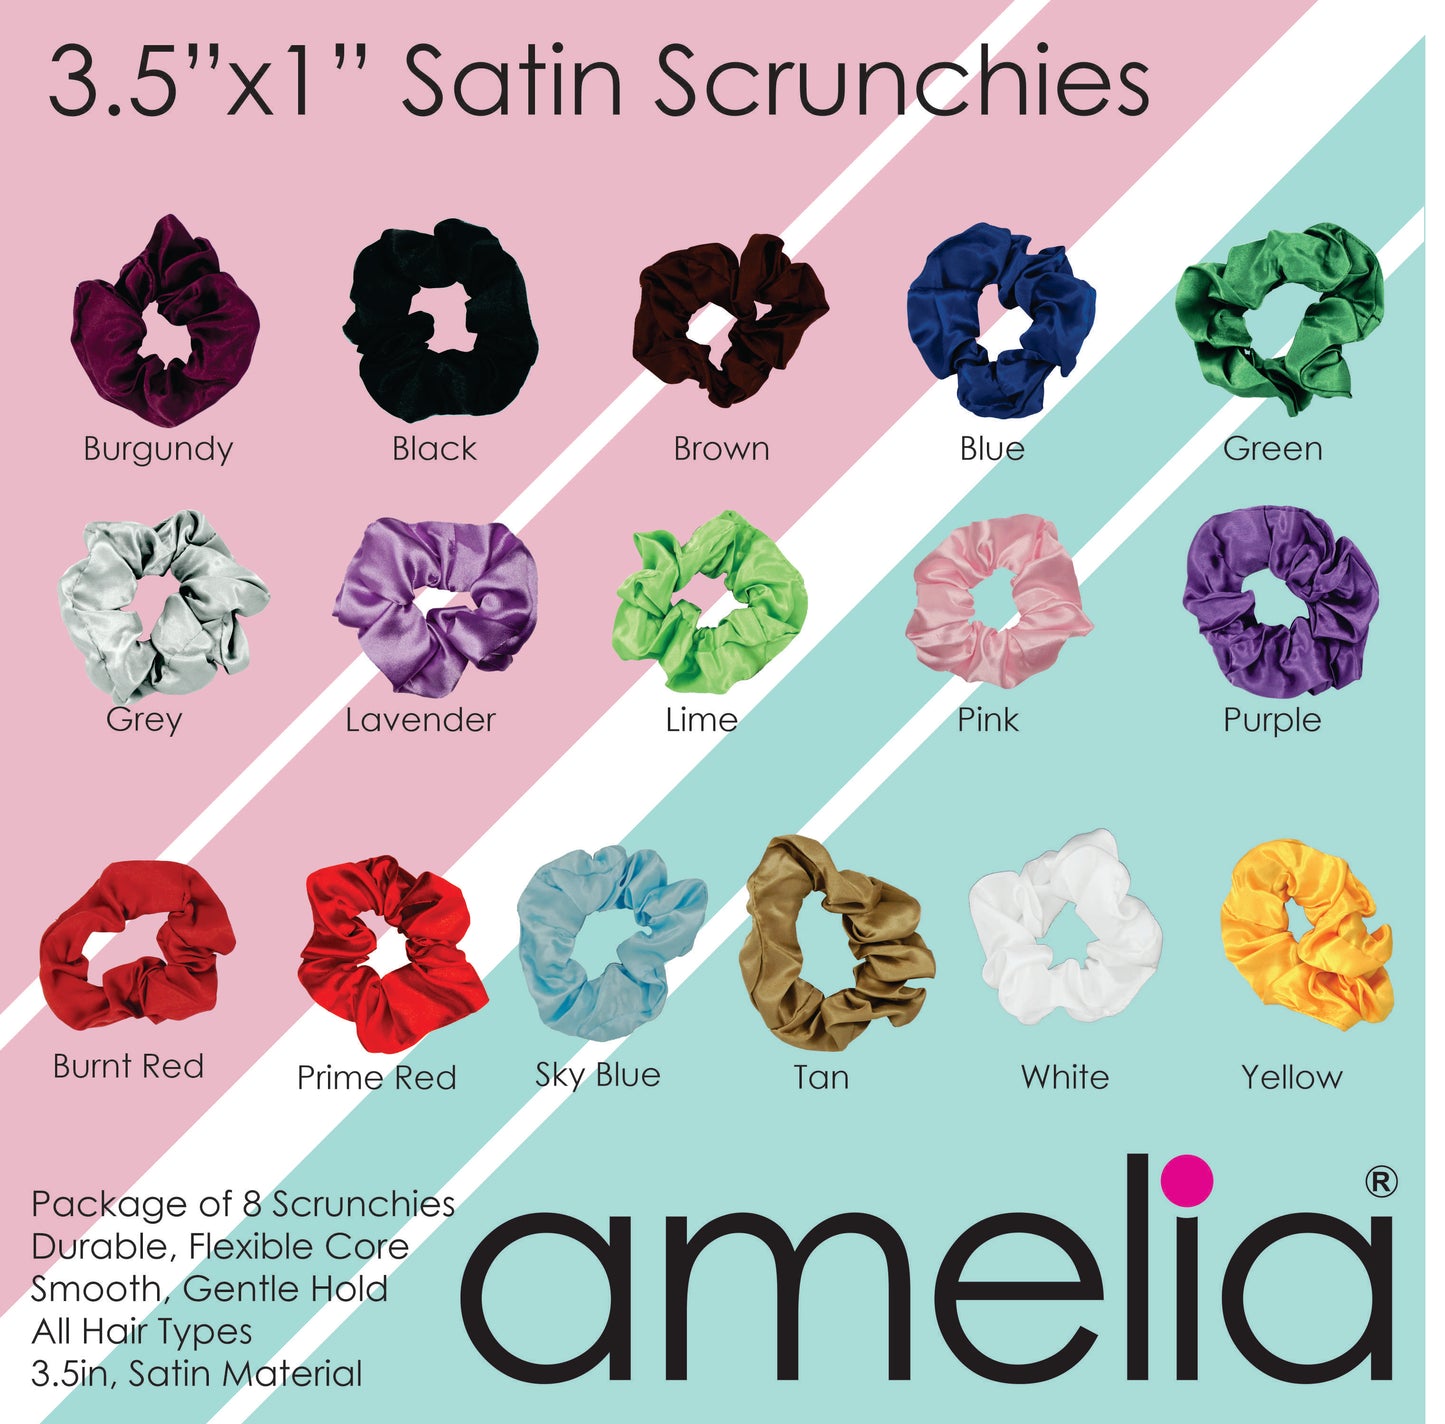 Amelia Beauty Products, Pink Satin Scrunchies, 3.5in Diameter, Gentle on Hair, Strong Hold, No Snag, No Dents or Creases. 8 Pack